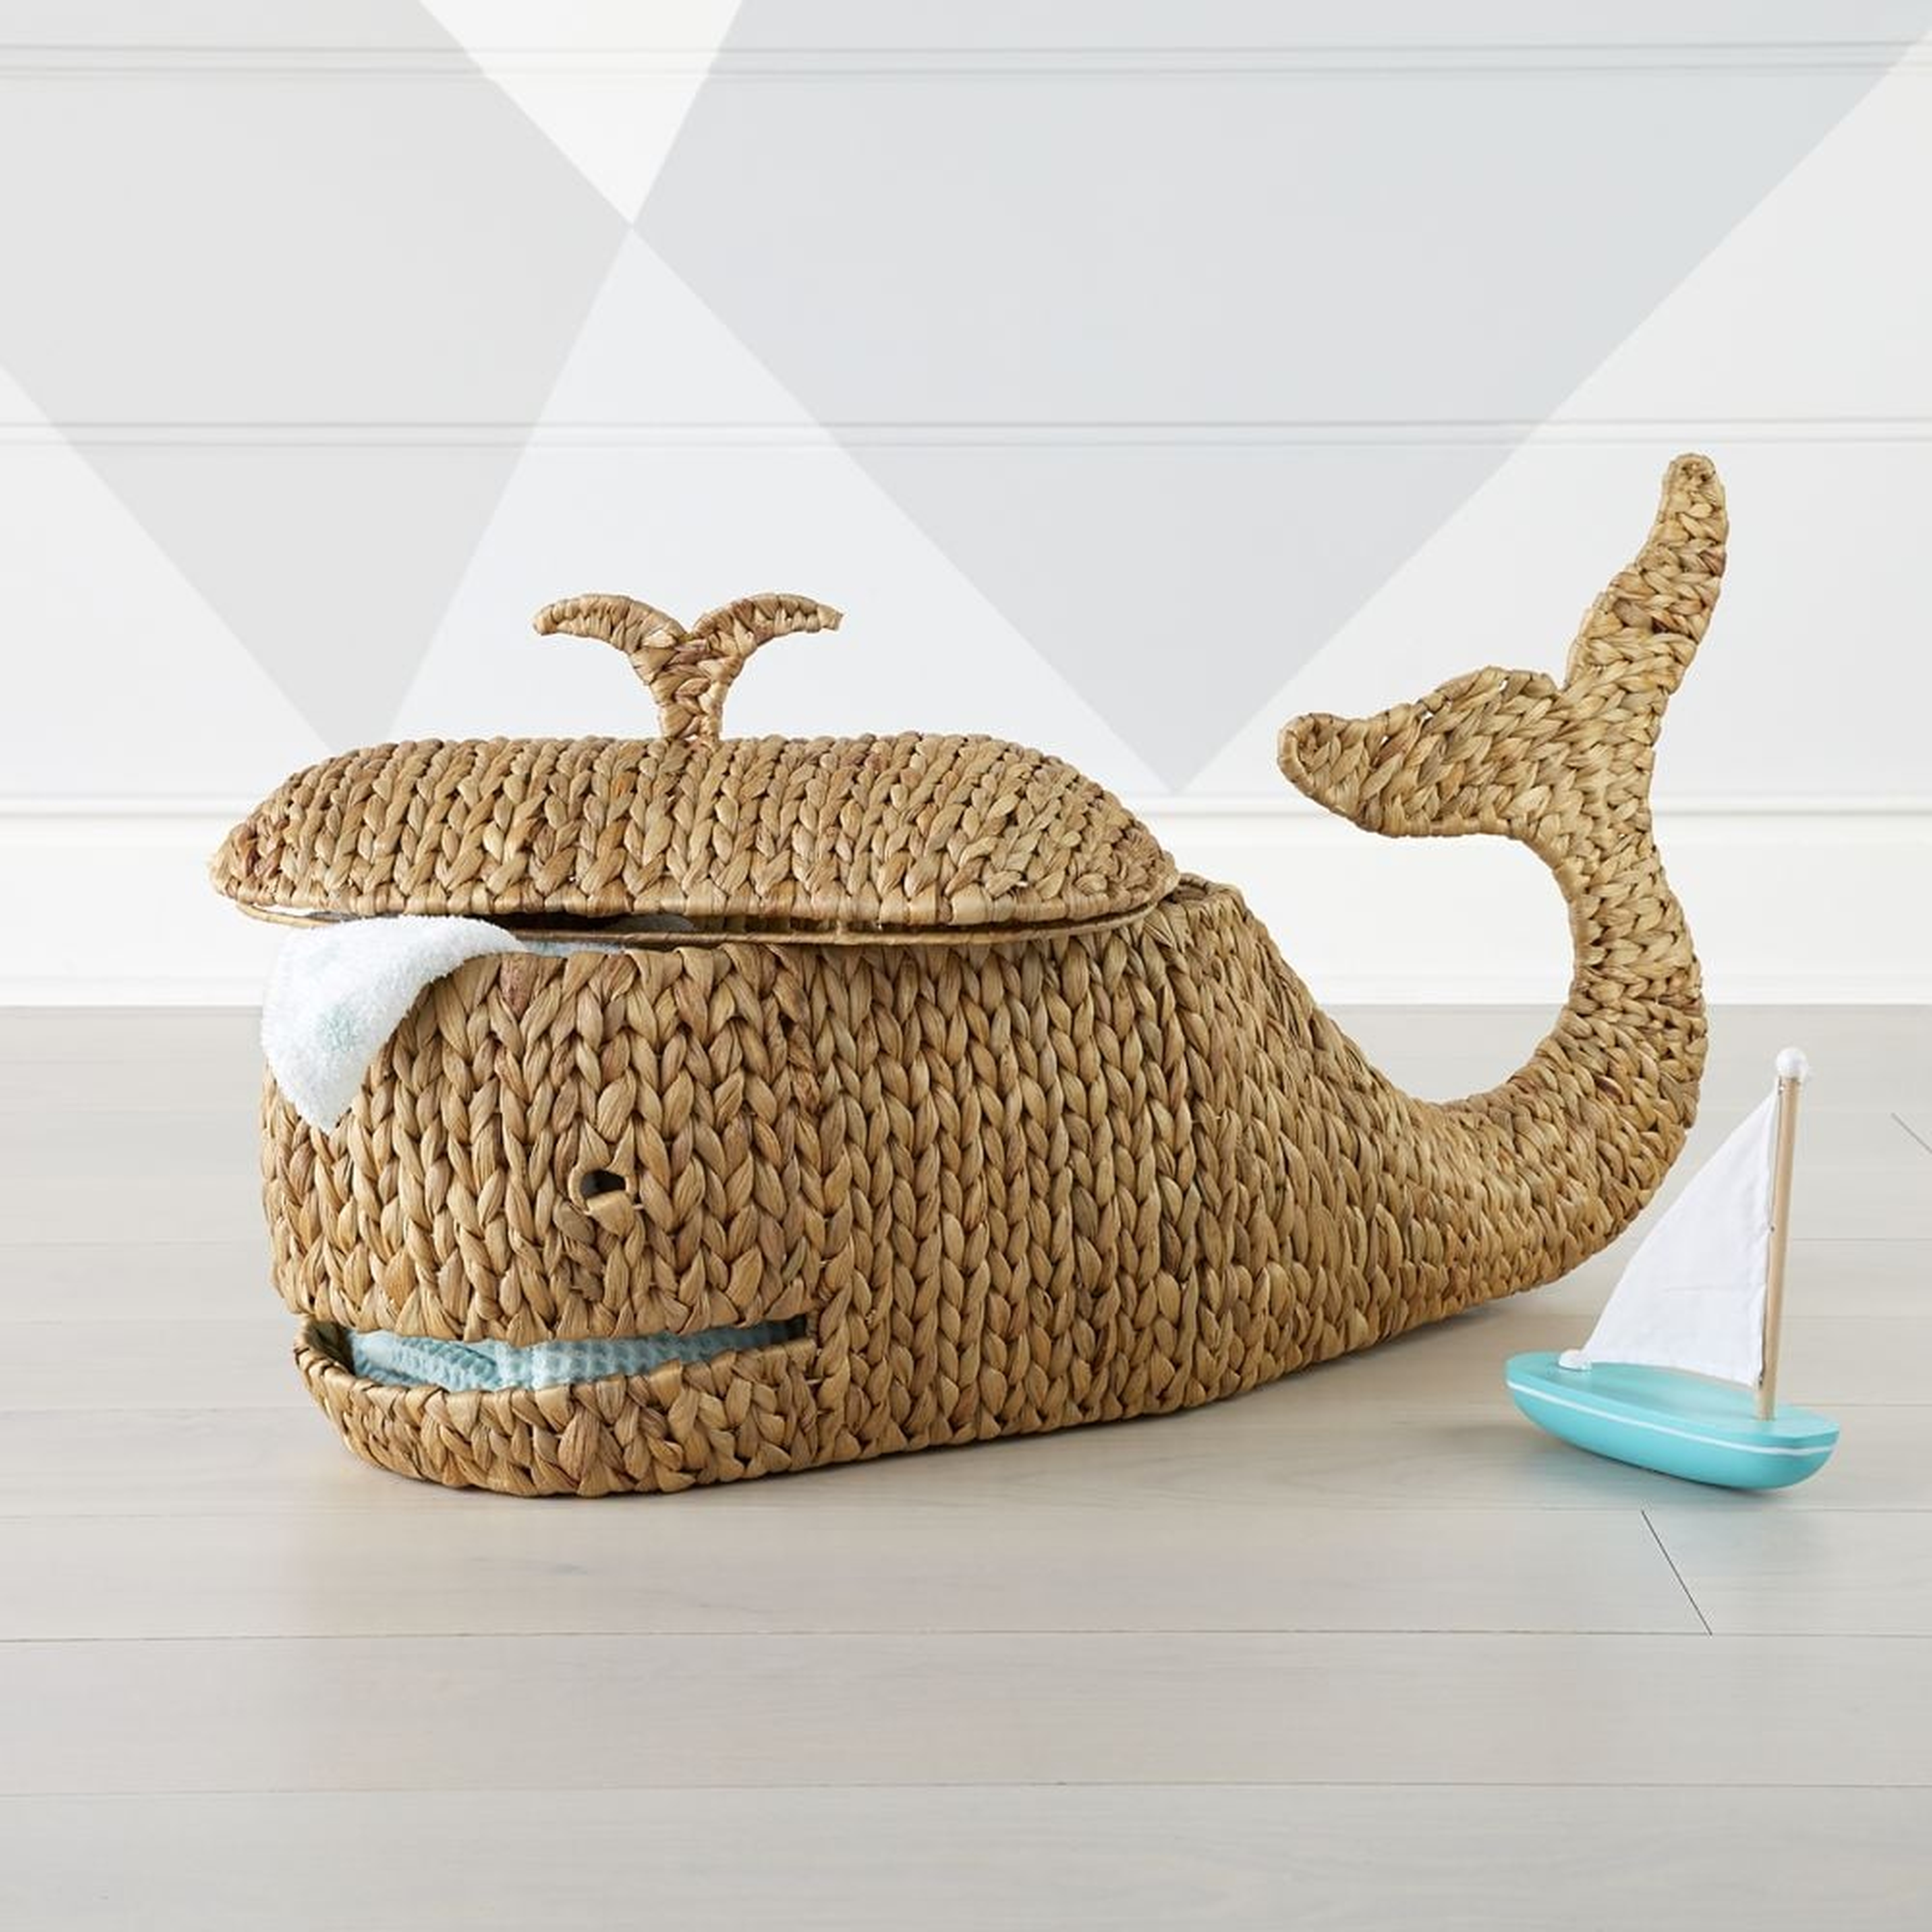 Whale Woven Floor Storage Basket - Crate and Barrel